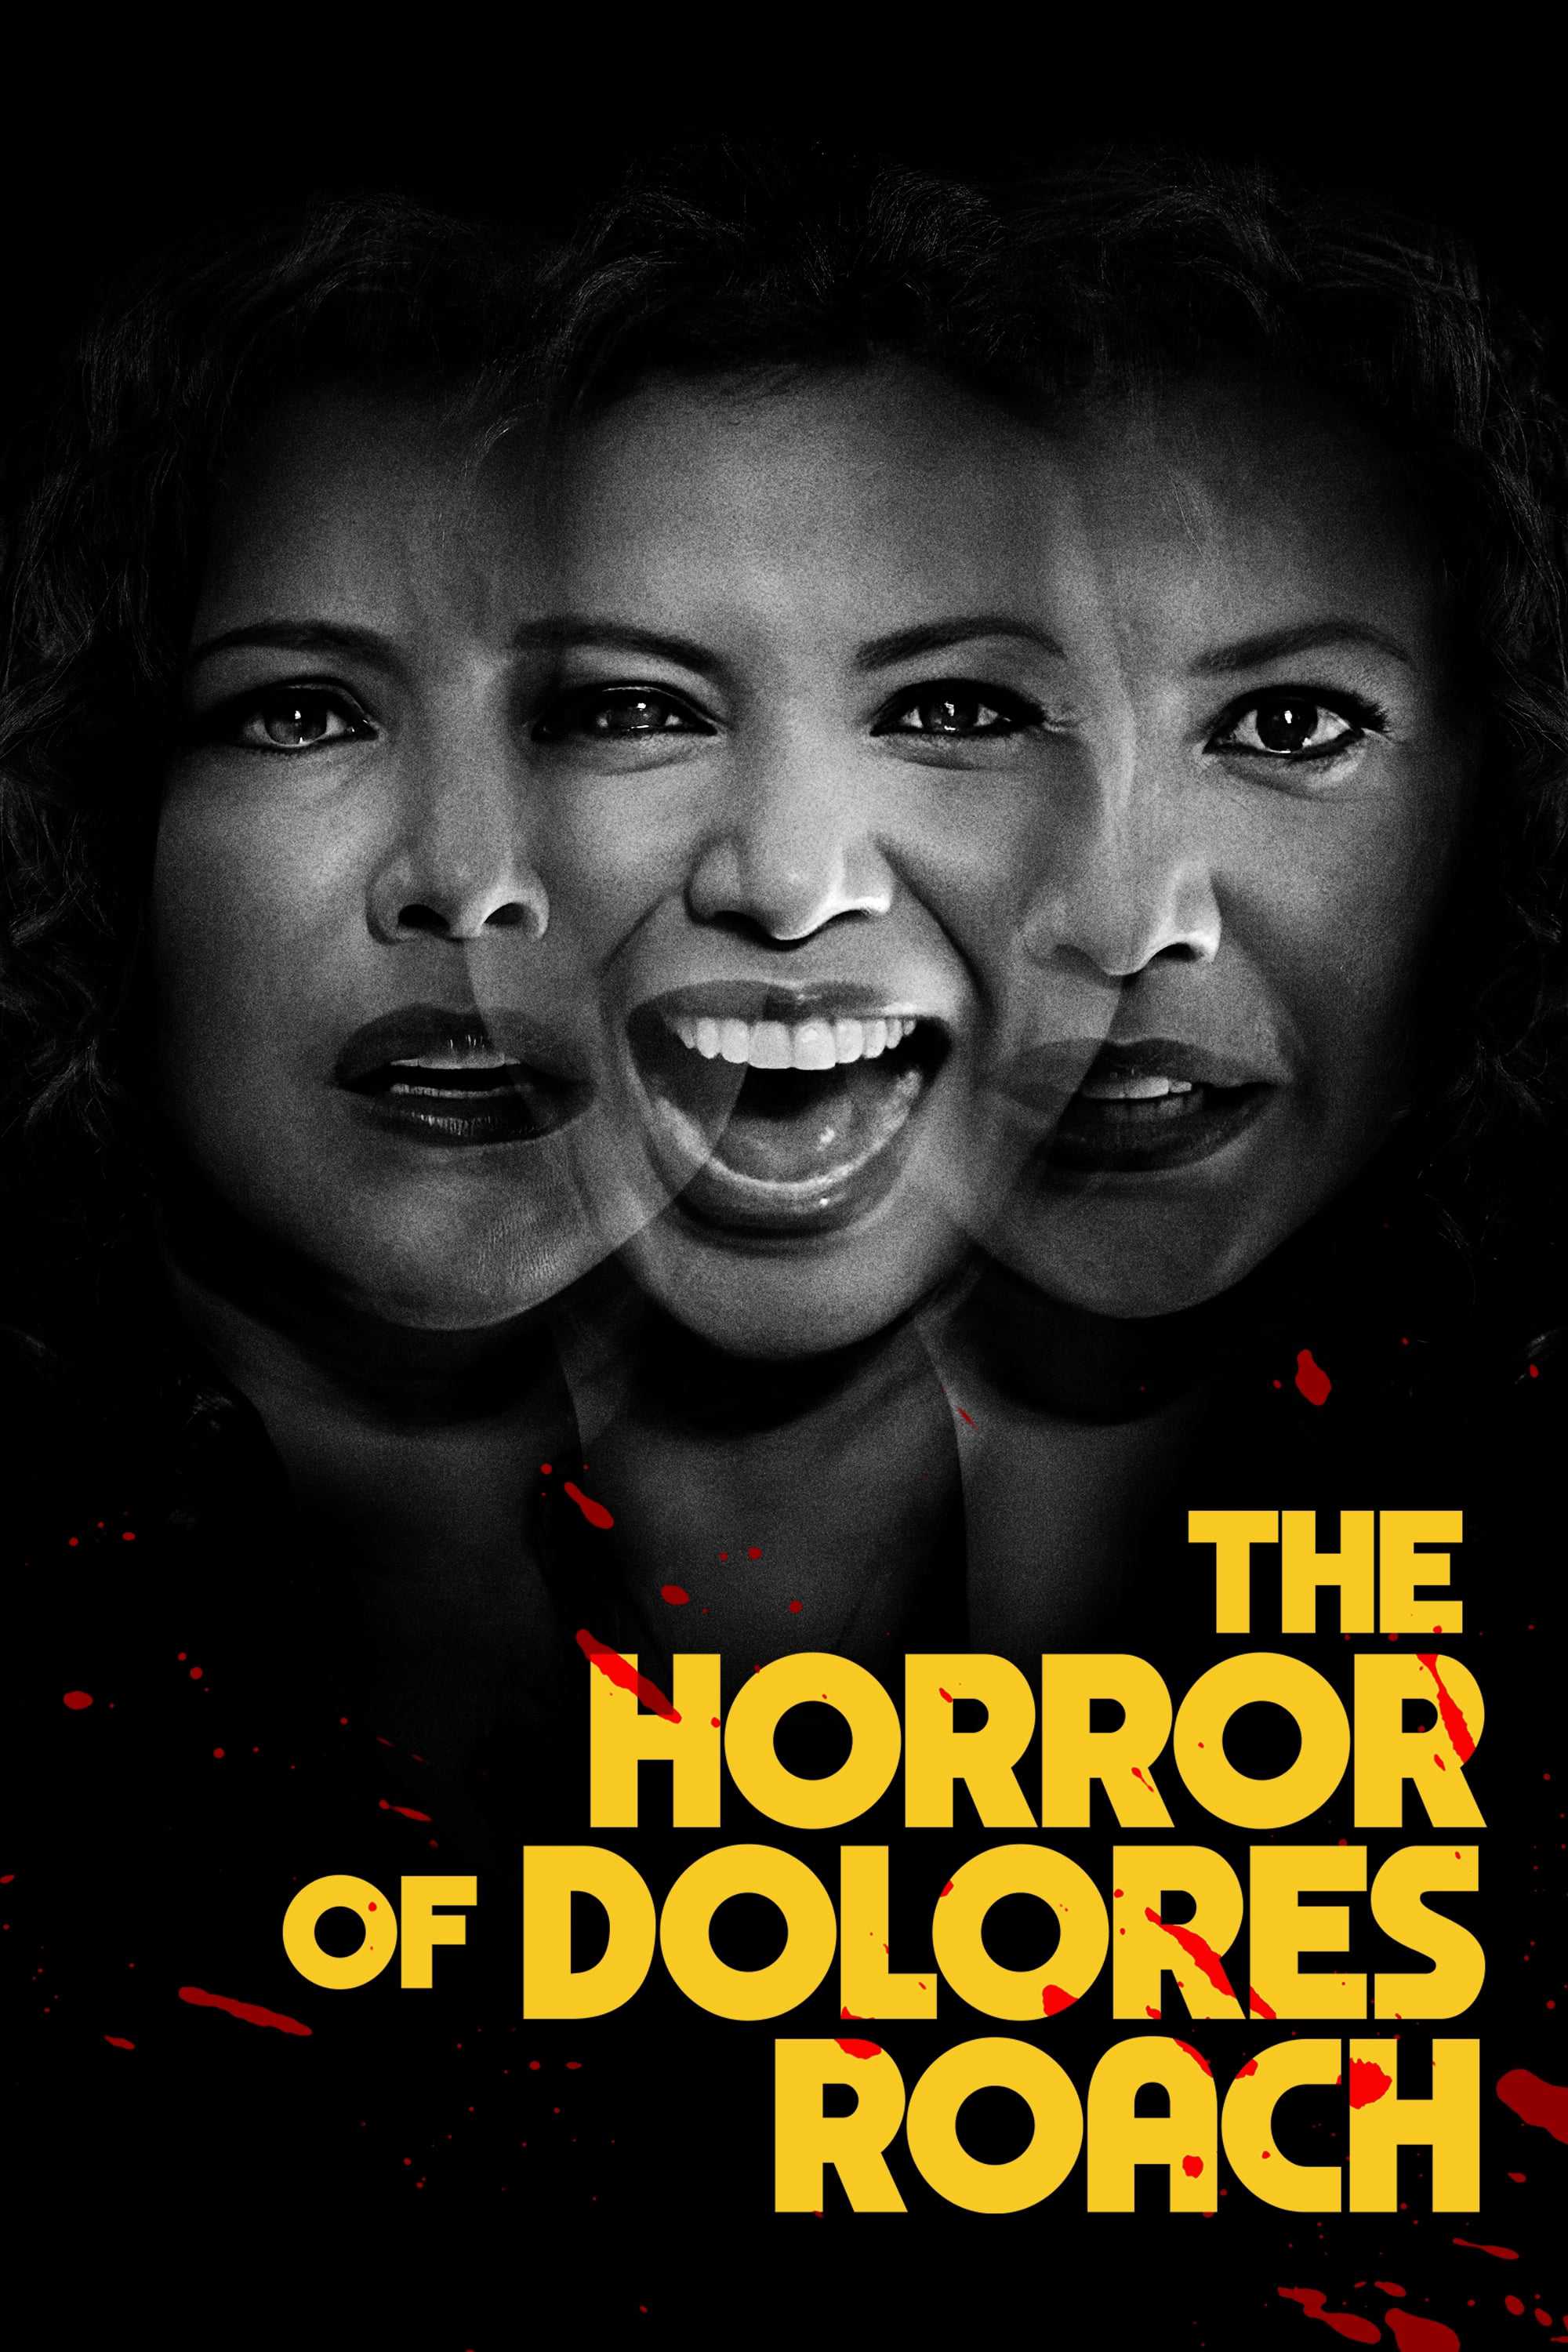 The Horror of Dolores Roach - The Horror of Dolores Roach